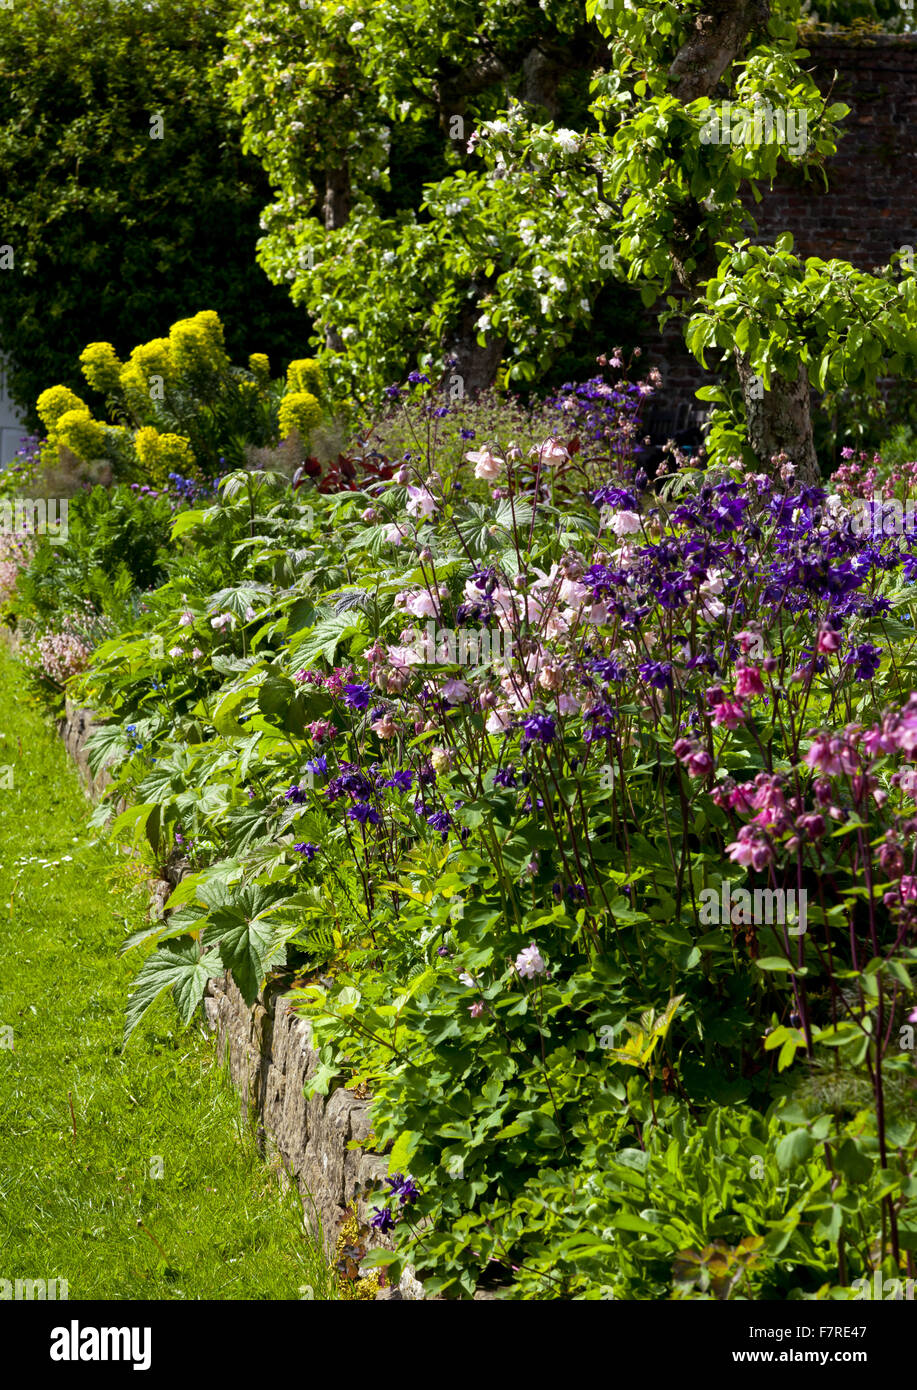 A border in spring in the garden at Eyam Hall and Craft Centre, Derbyshire. Eyam Hall is an unspoilt example of a gritstone Jacobean manor house, set within a walled garden. Stock Photo